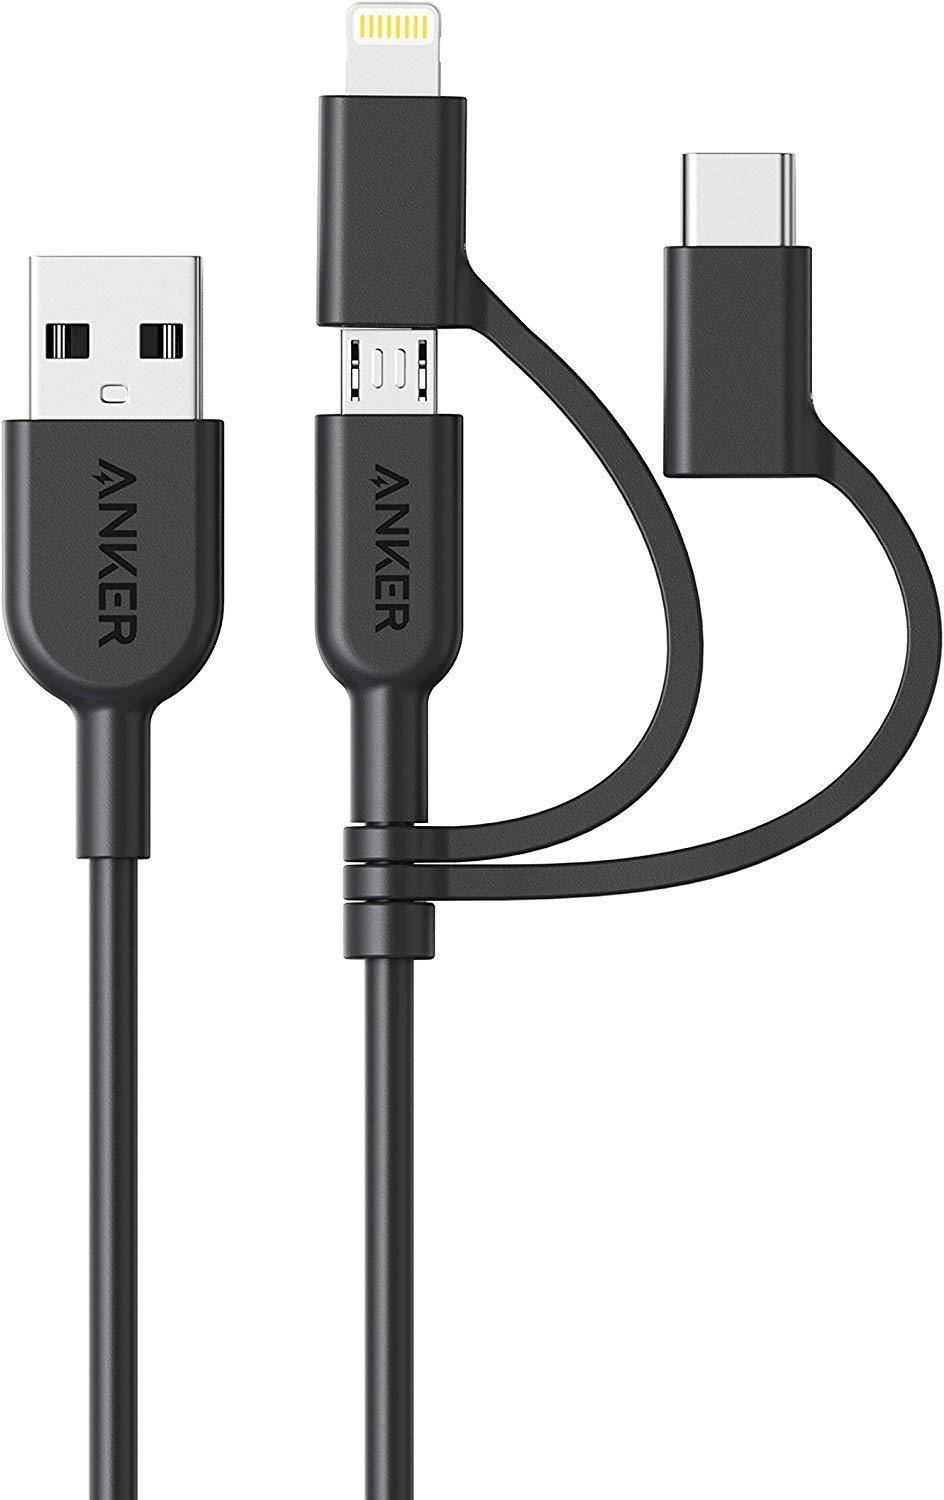 Anker PowerLine ll 3 in 1 USB-A to USB-C Micro USB Lightning Charging Cable zoom image